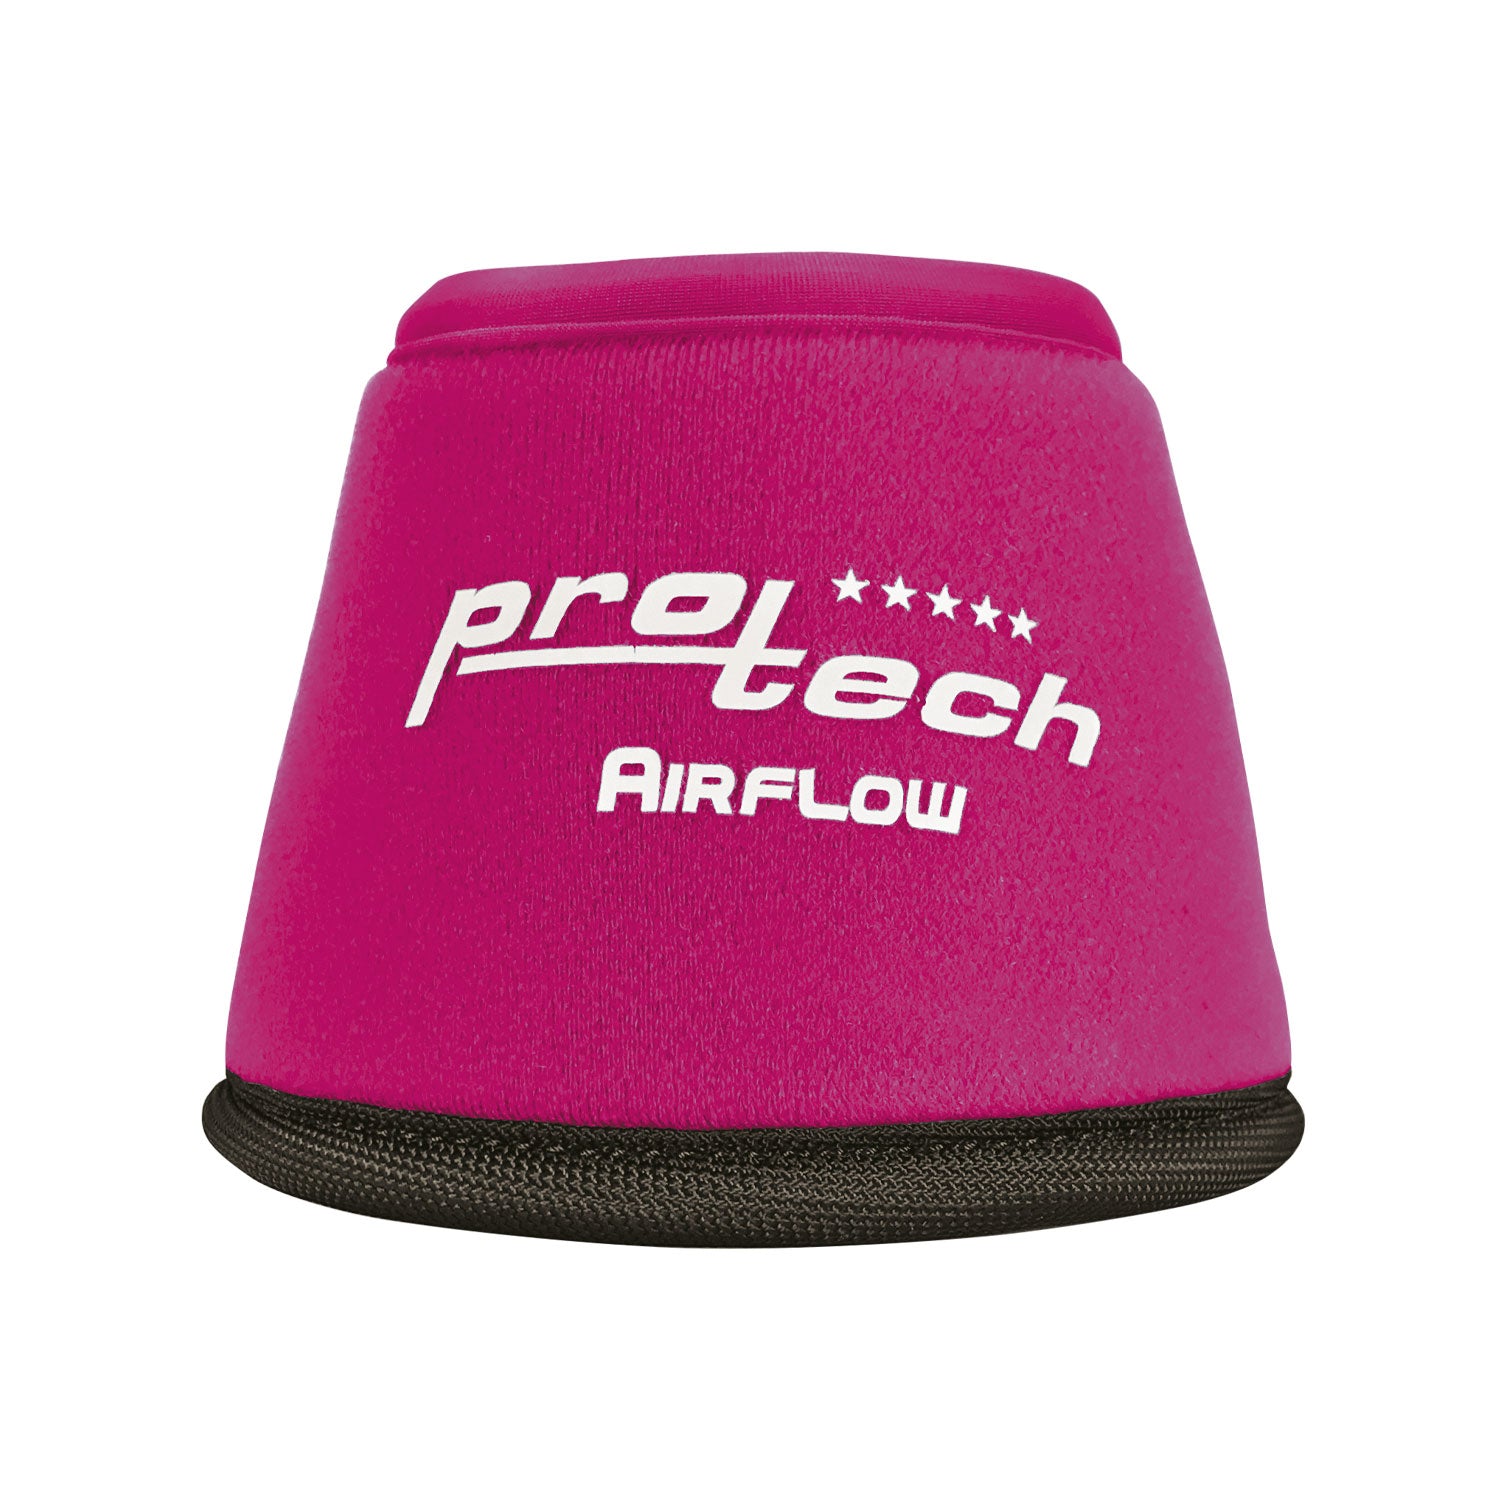 AIRFLOW PERFORMA bell boots